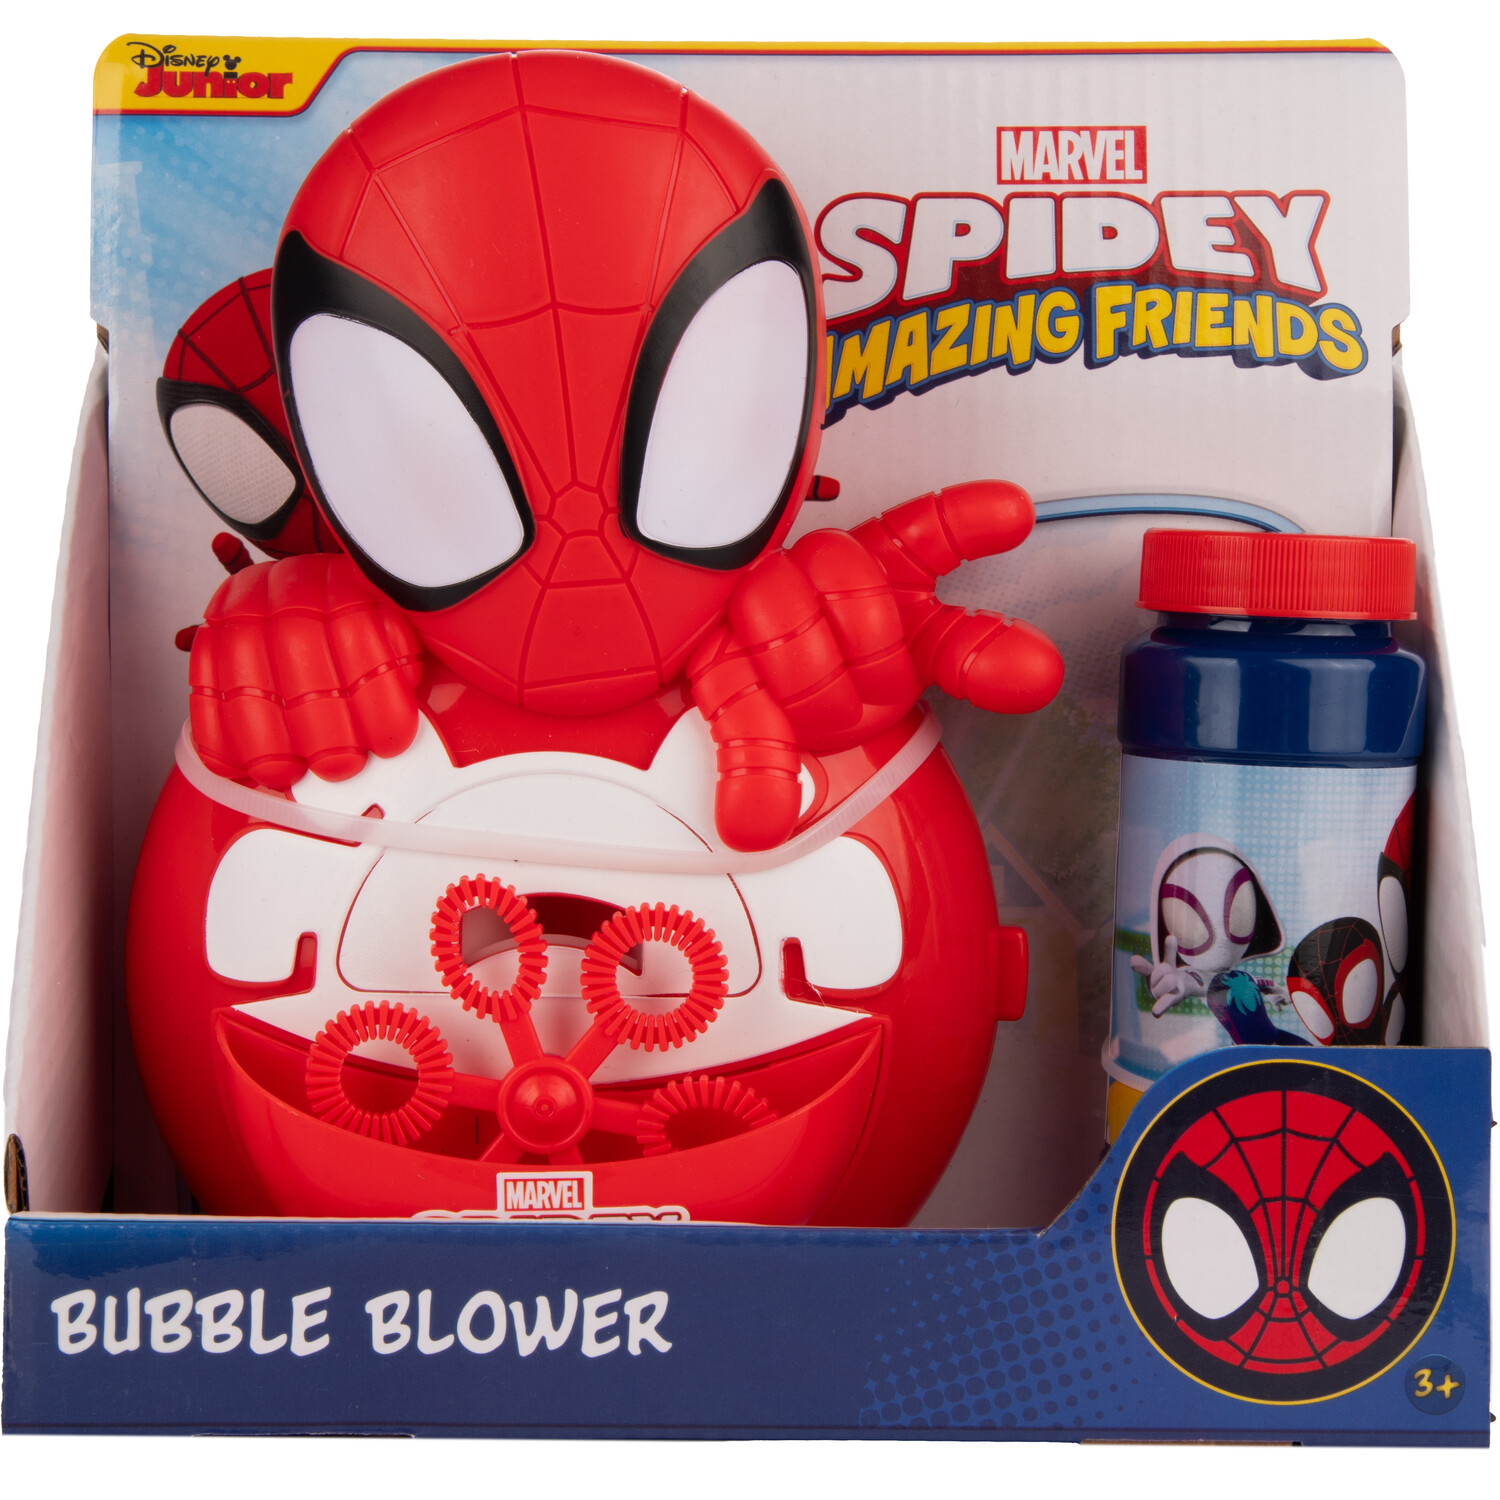 Spidey and his Amazing Friends Bubble Blower - Red Image 1